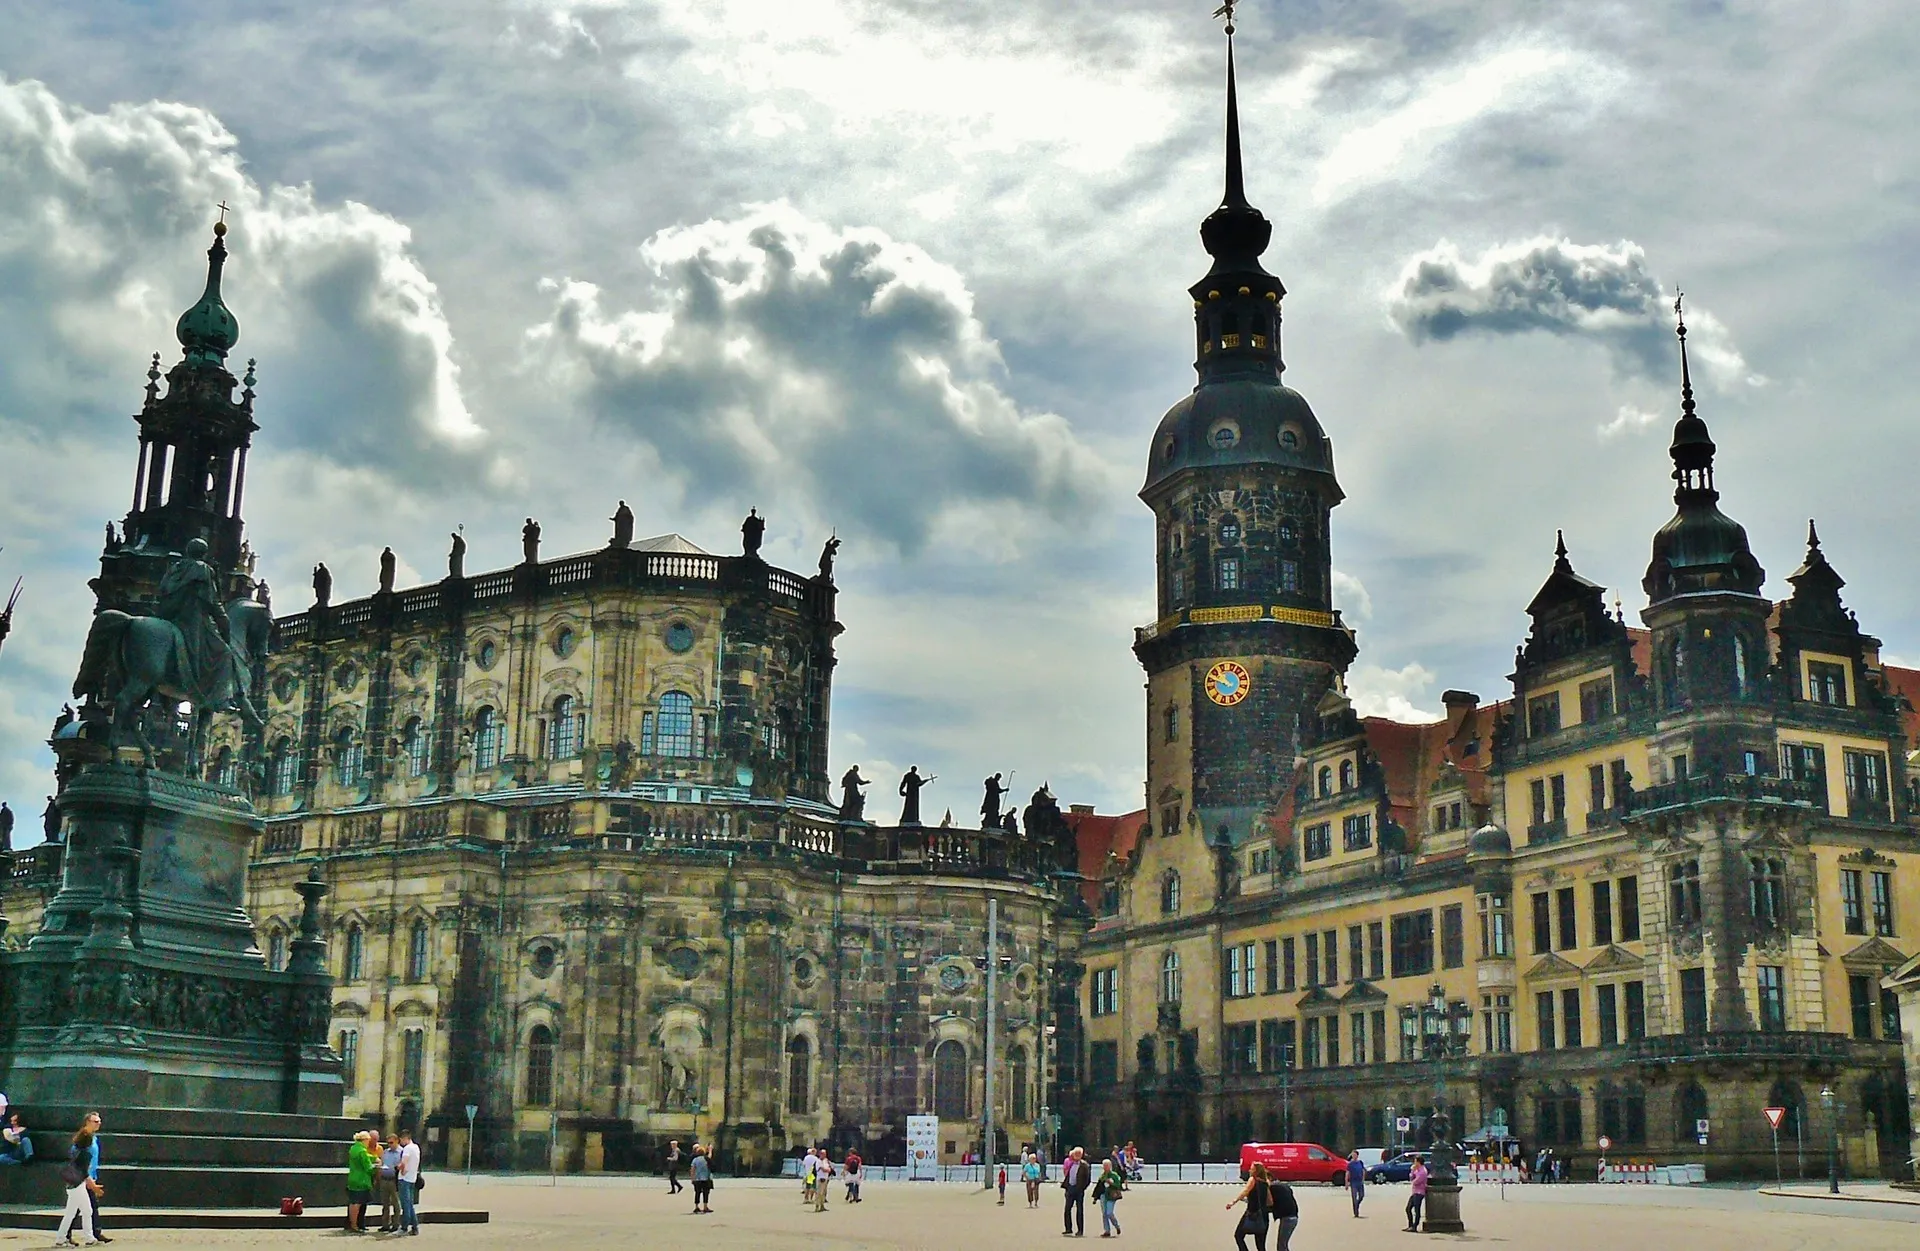 View to Dresden’s castle in Dresden’s historic city center.